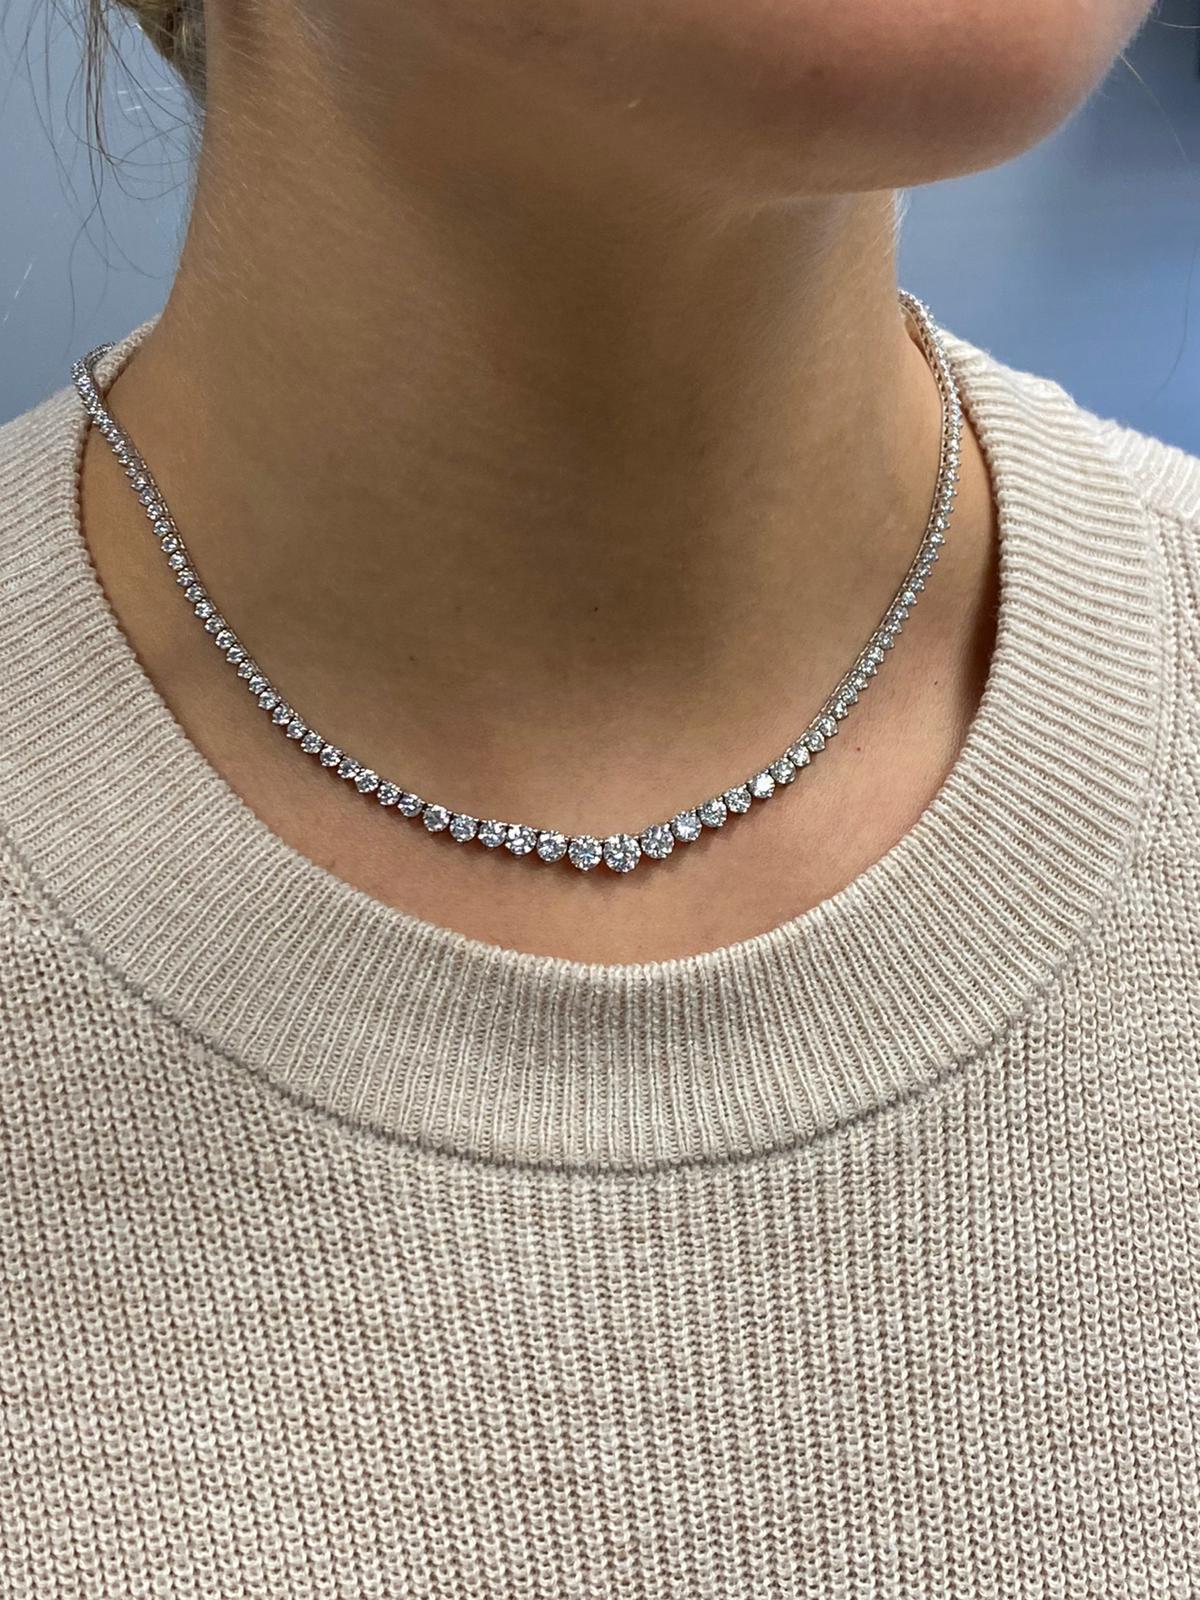 This exquisite graduated riviera necklace set in handmade 18k white gold featuring perfectly cut ideal round brilliant diamonds. the super white diamonds are in E-F color and VVS to VS clarity with a total carat weight of 10.71.
the center stone is